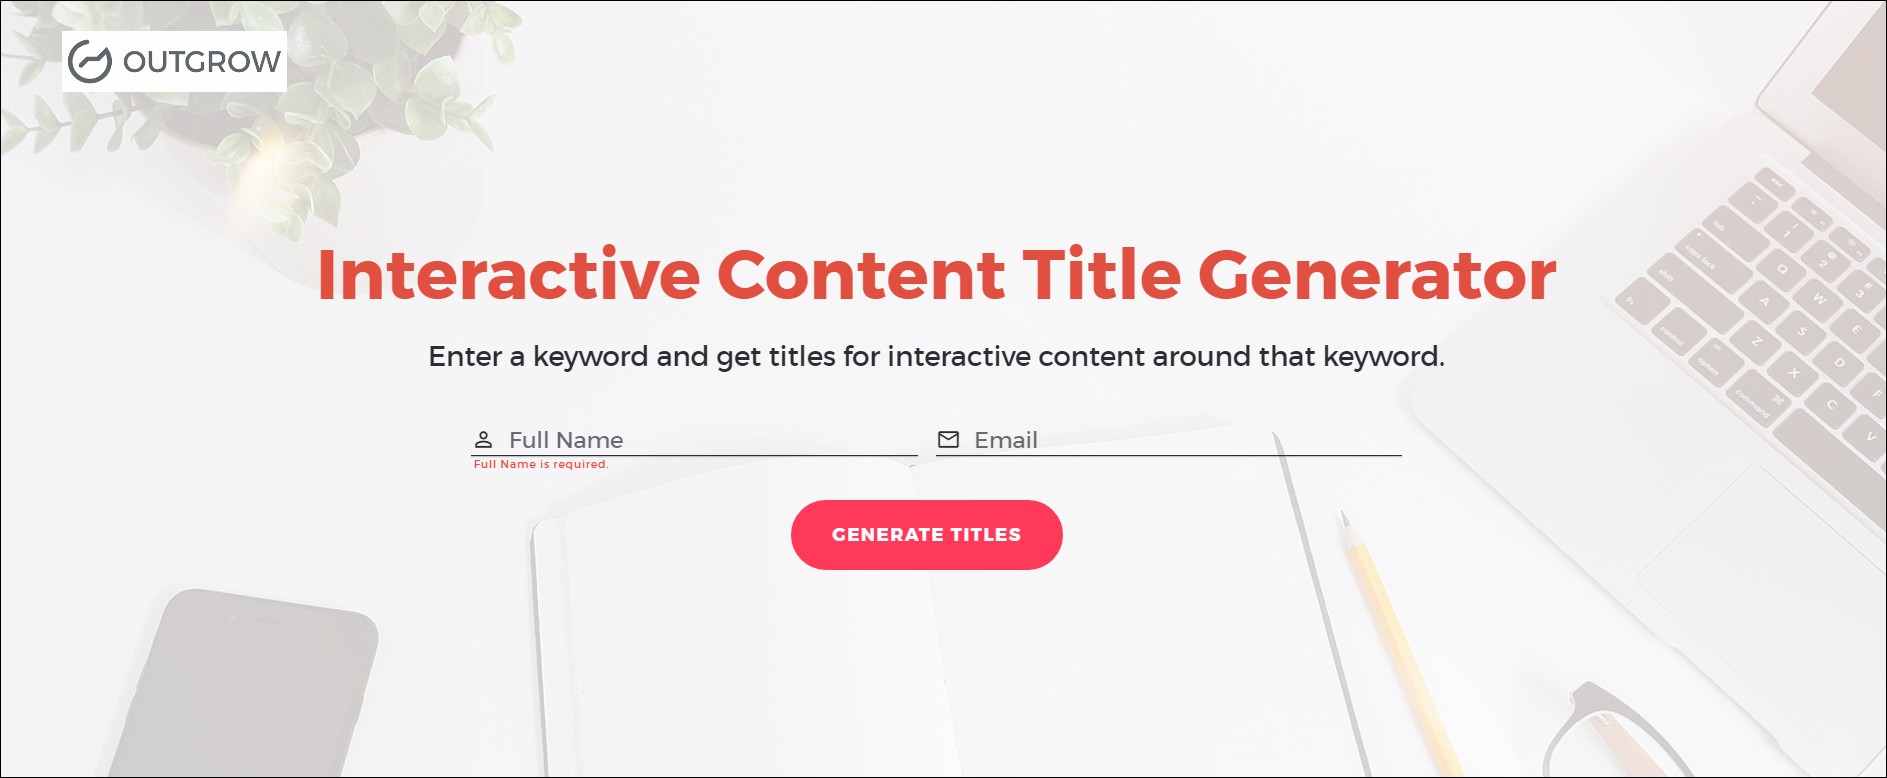 Using Interactive Content To Earn Money (+9 Use Cases)